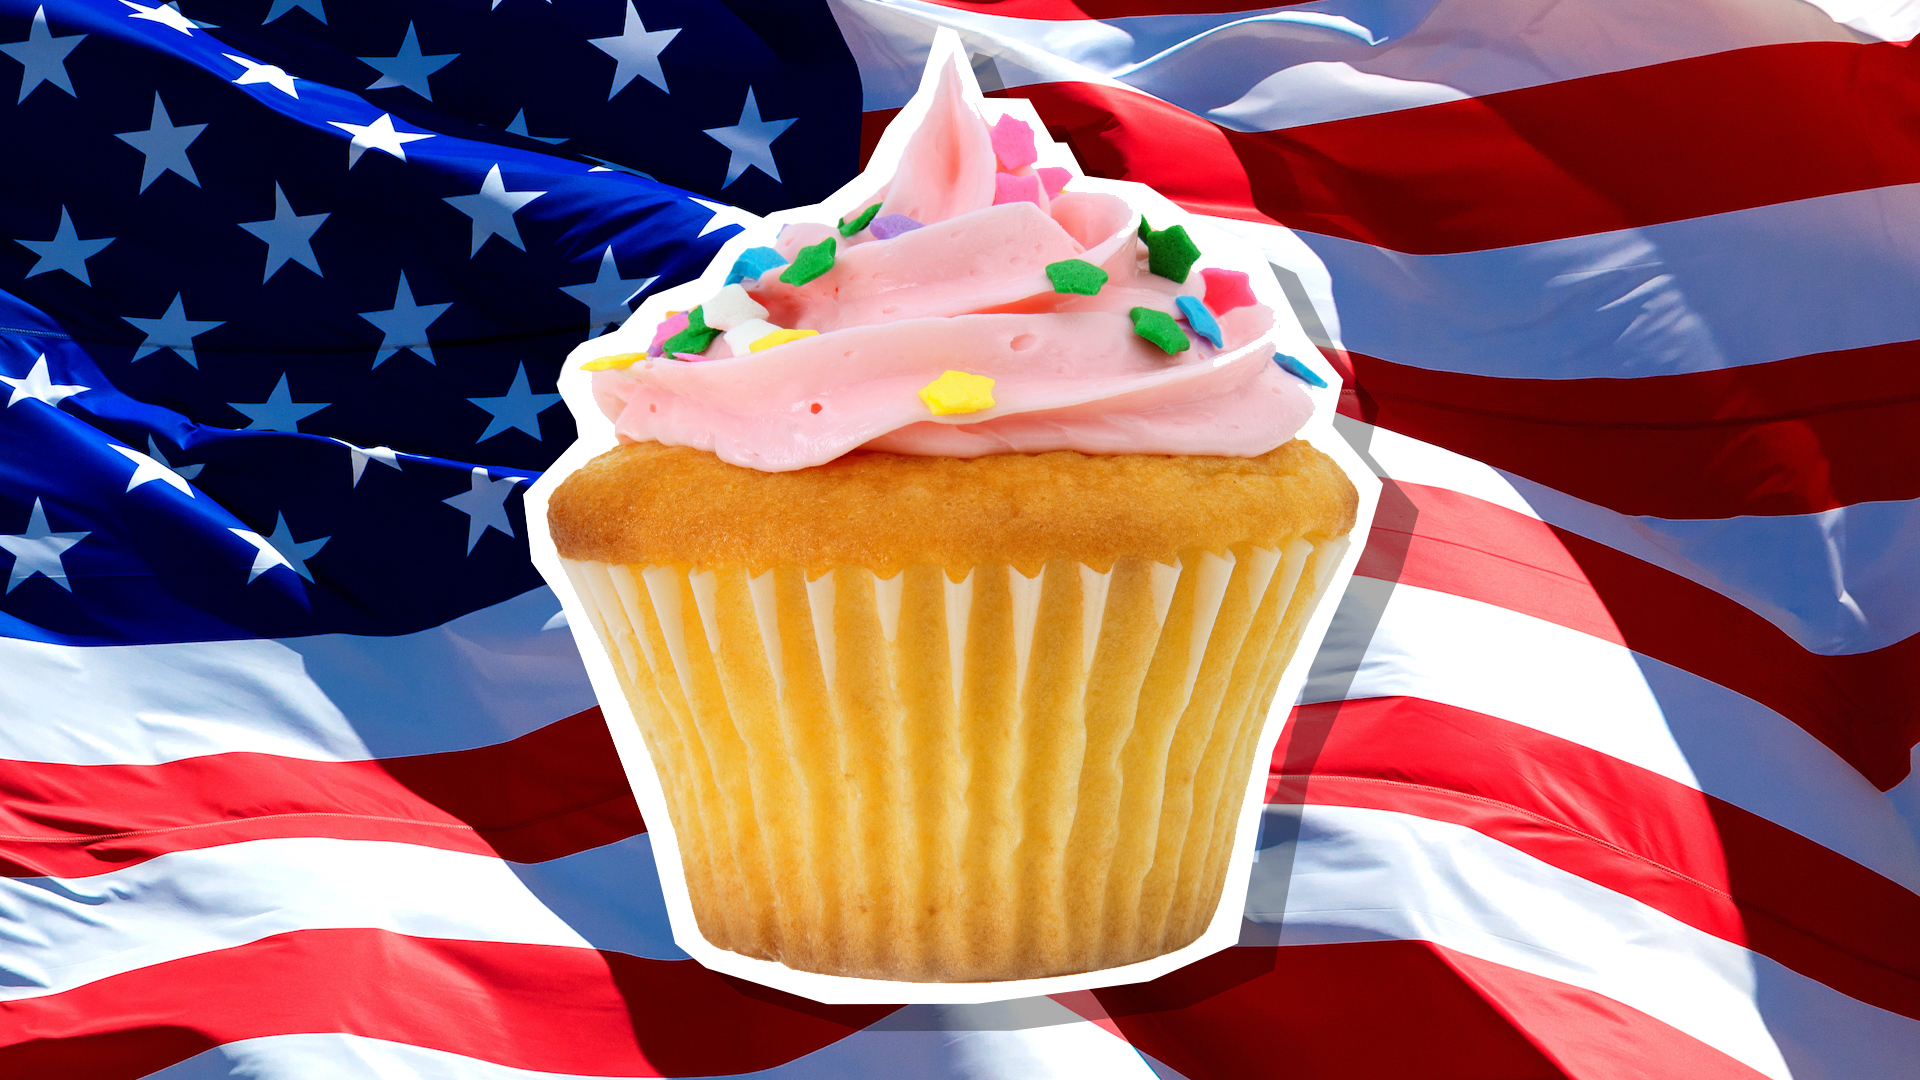 A cupcake in front of the USA flag